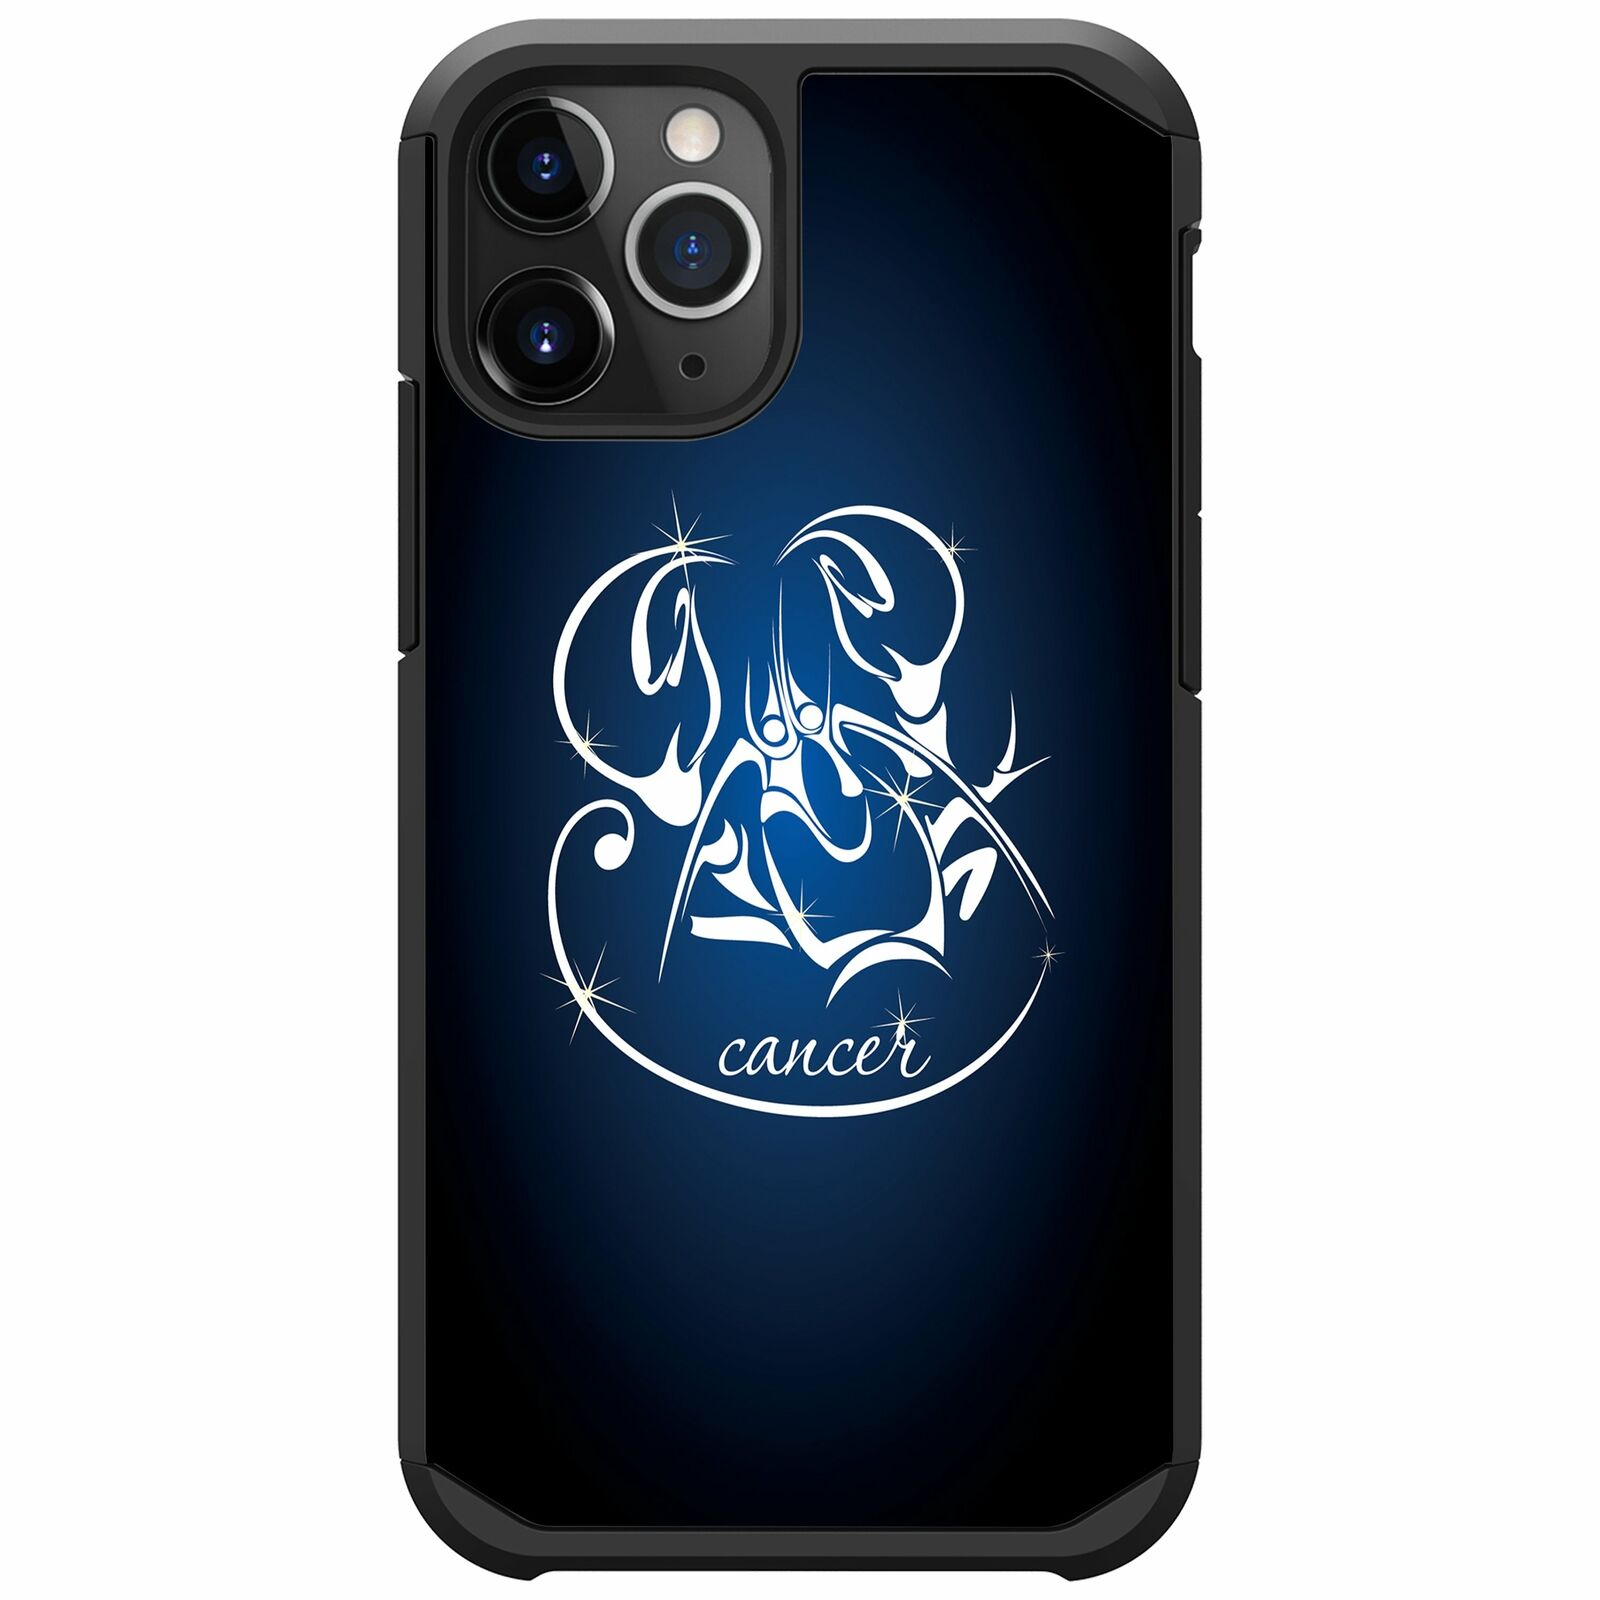 For Apple iPhone 11 PRO MAX (6.5) Slim Protective Dual Layer Case Zodiac iPhone Cases AtlasCase Cancer 